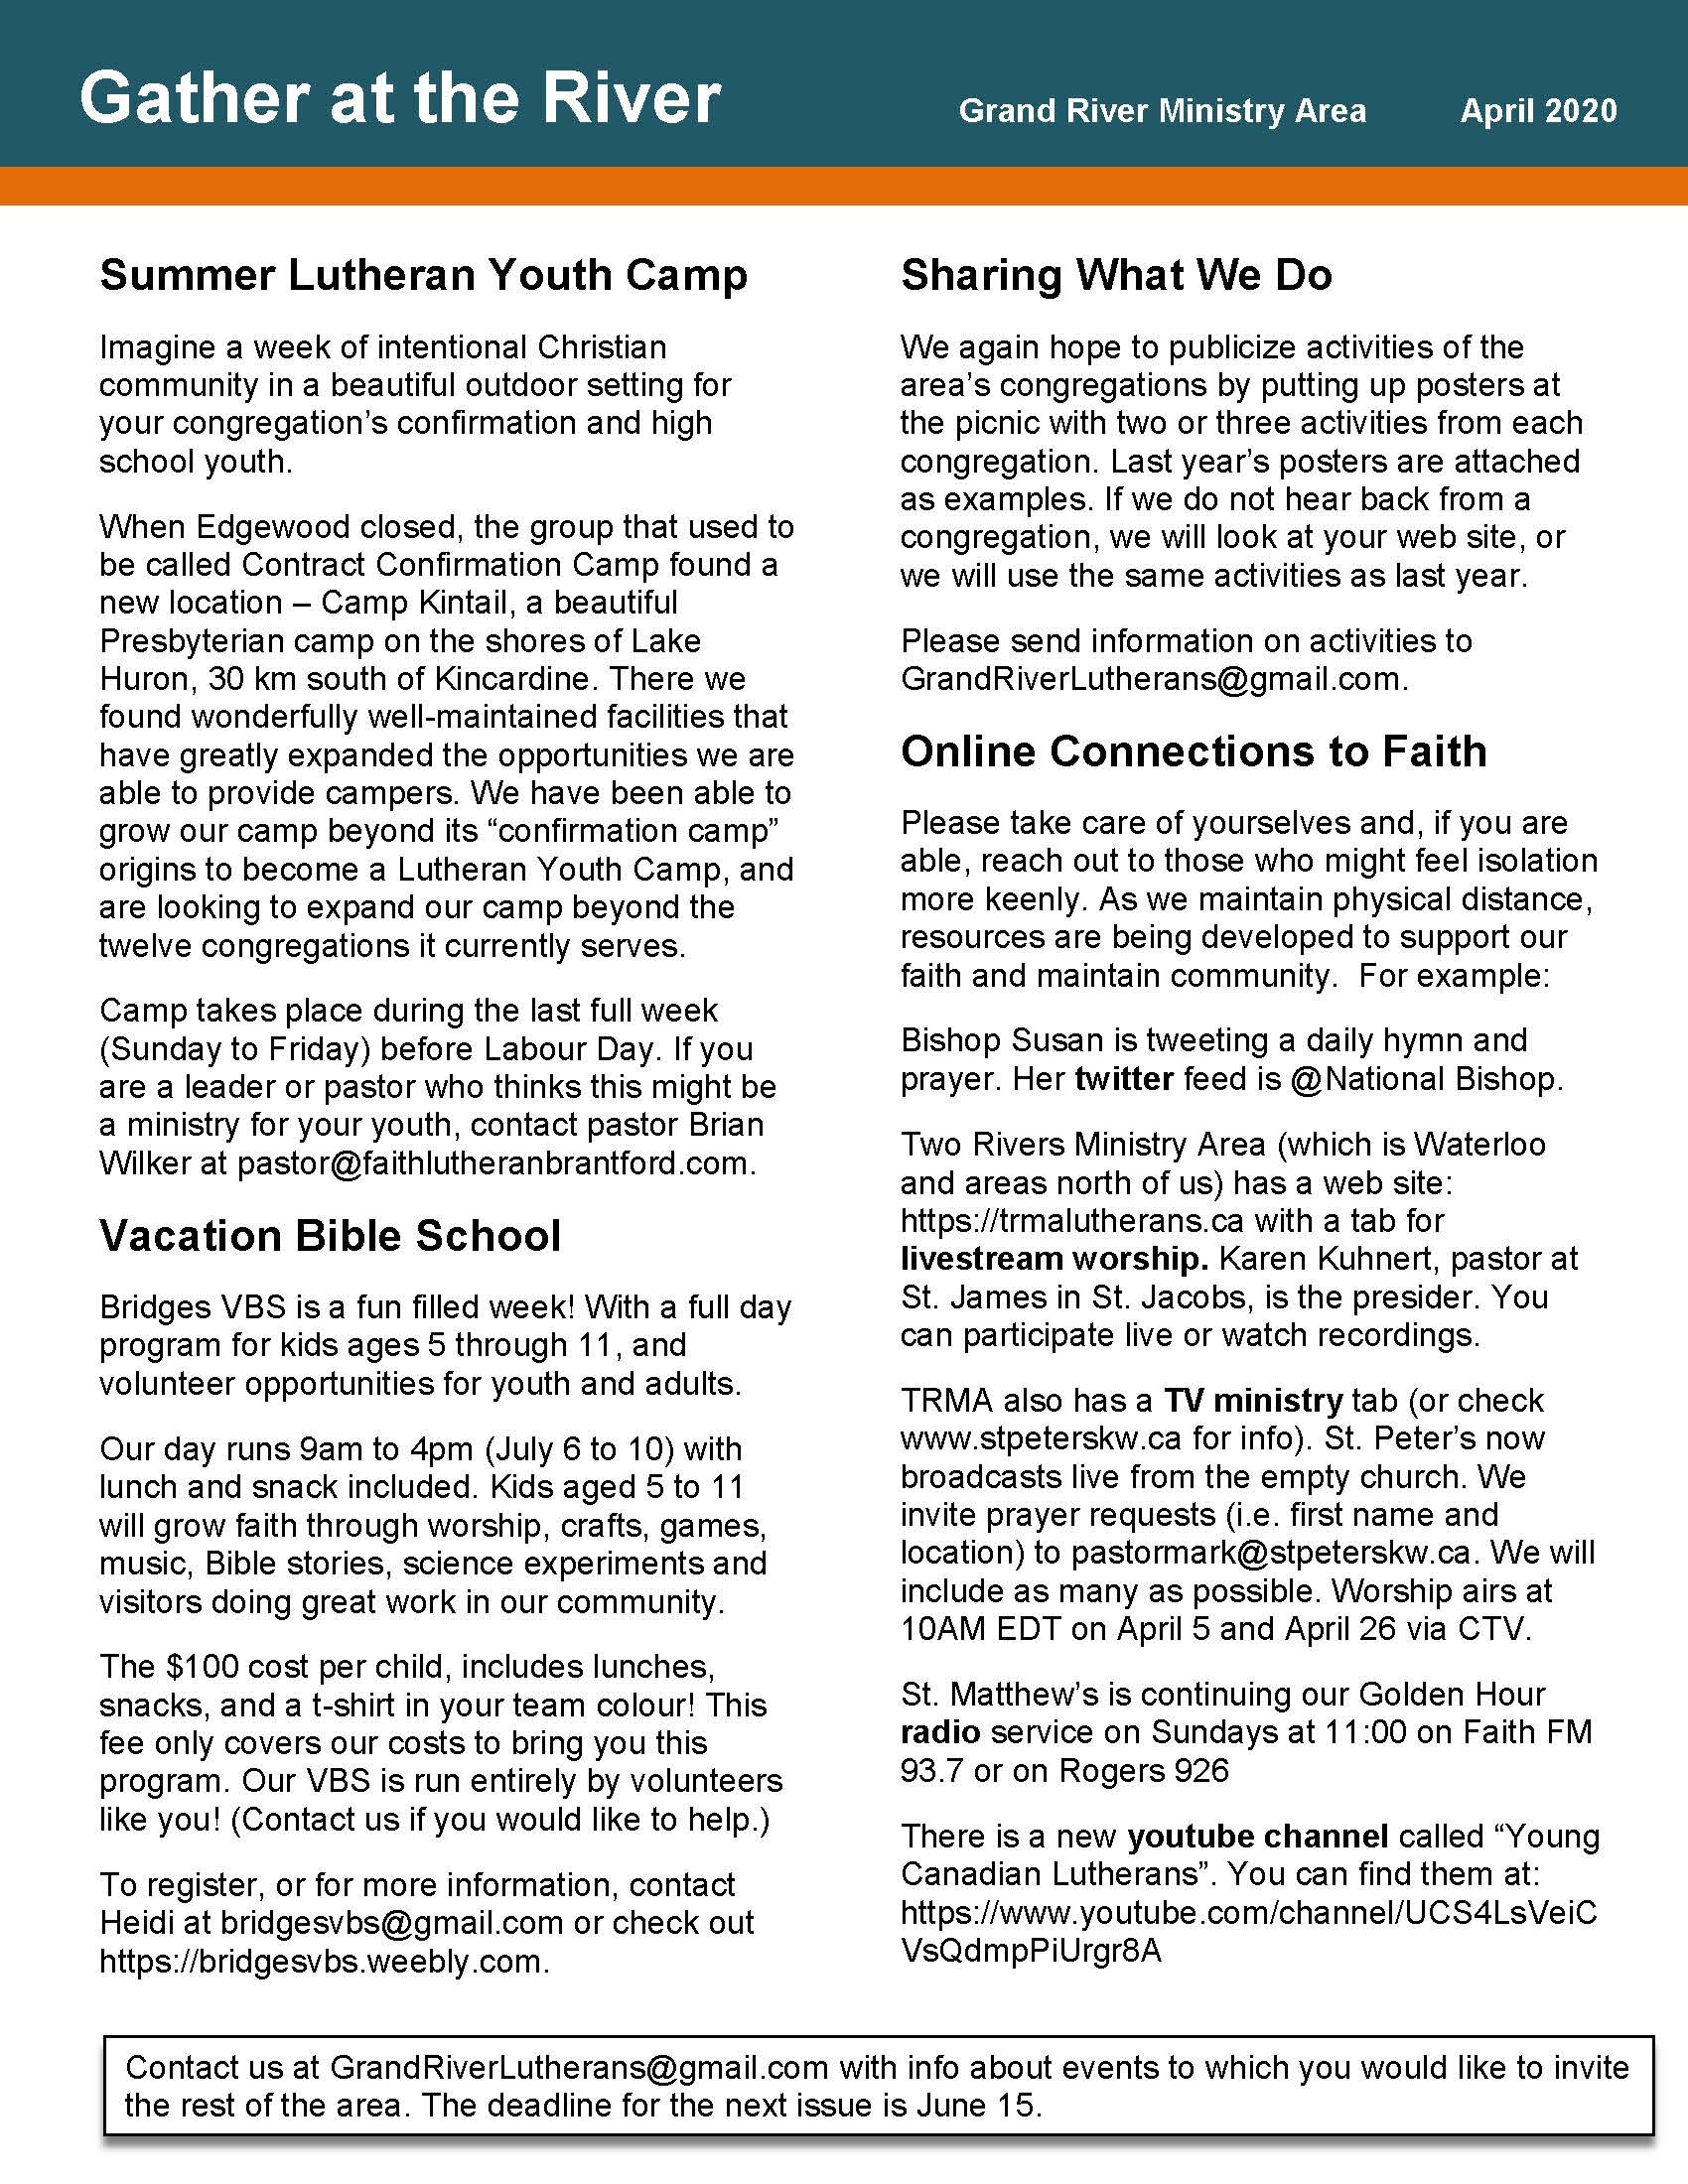 20 04 GRMA Newsletter_Page_2.jpg